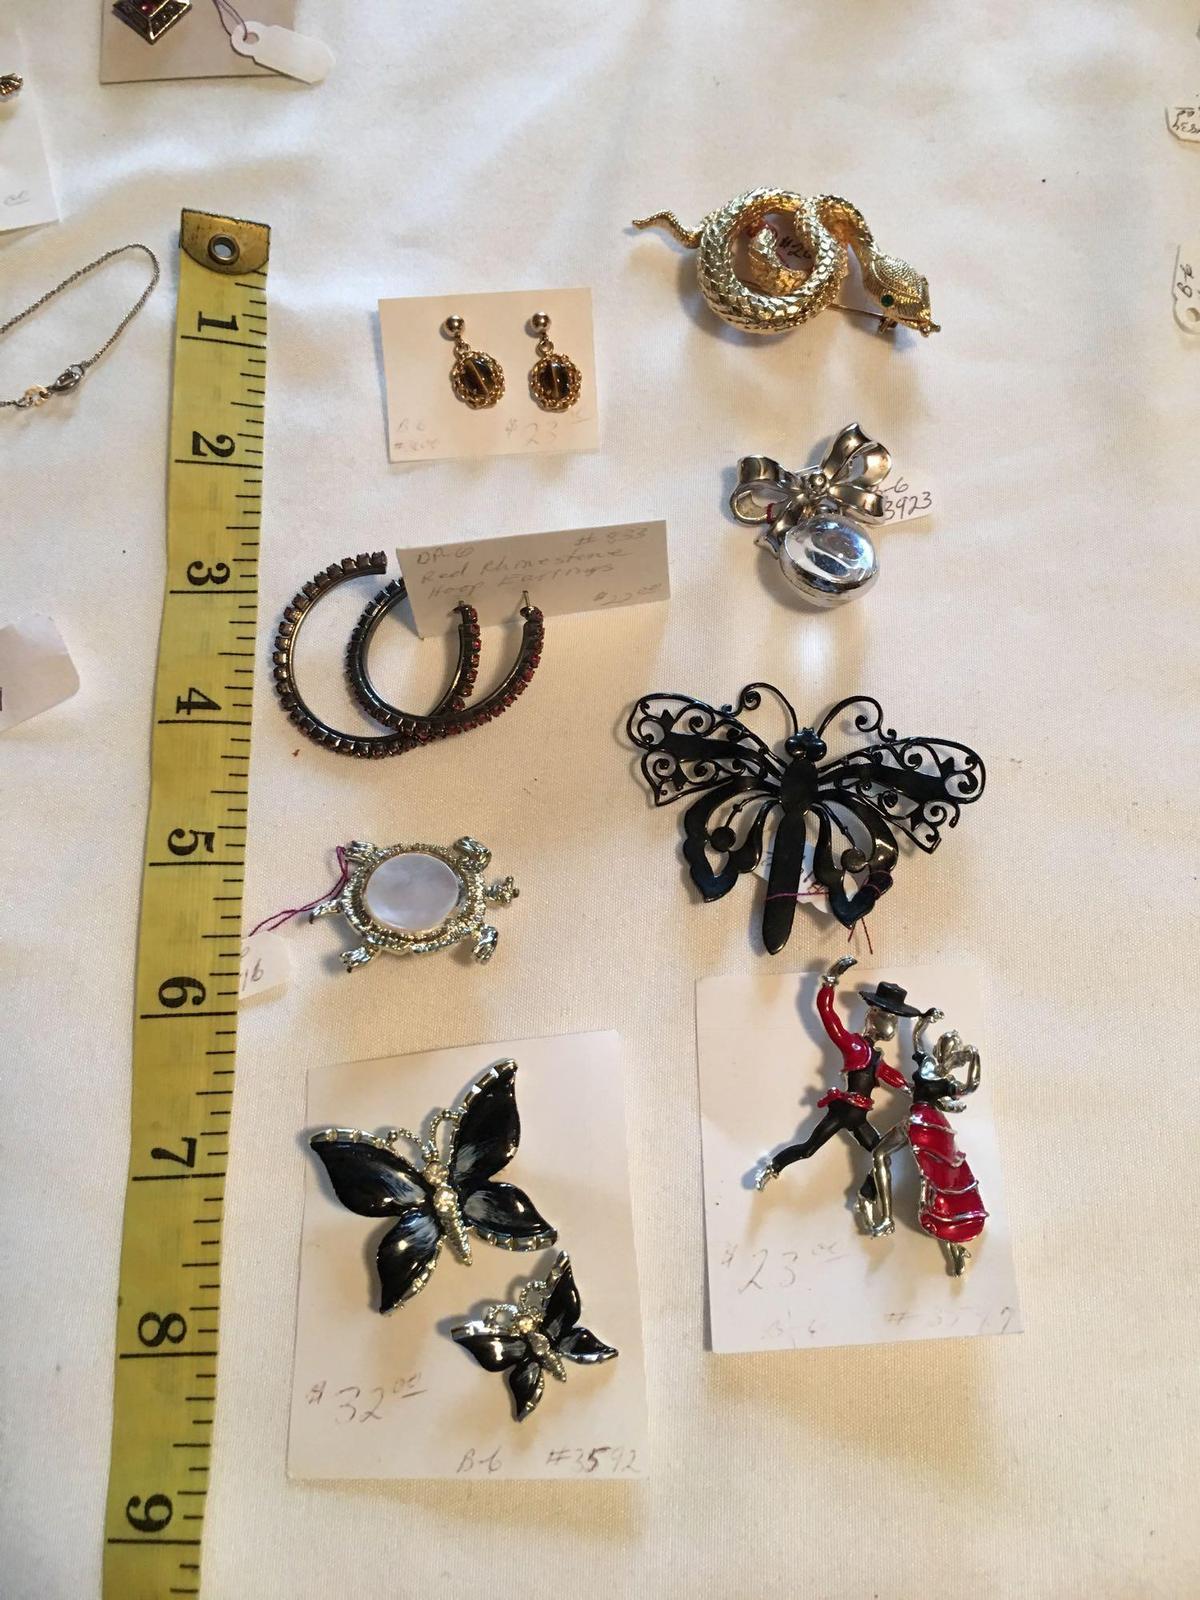 Large lot of wonderful fashion jewelry. Earrings, brooches and pins